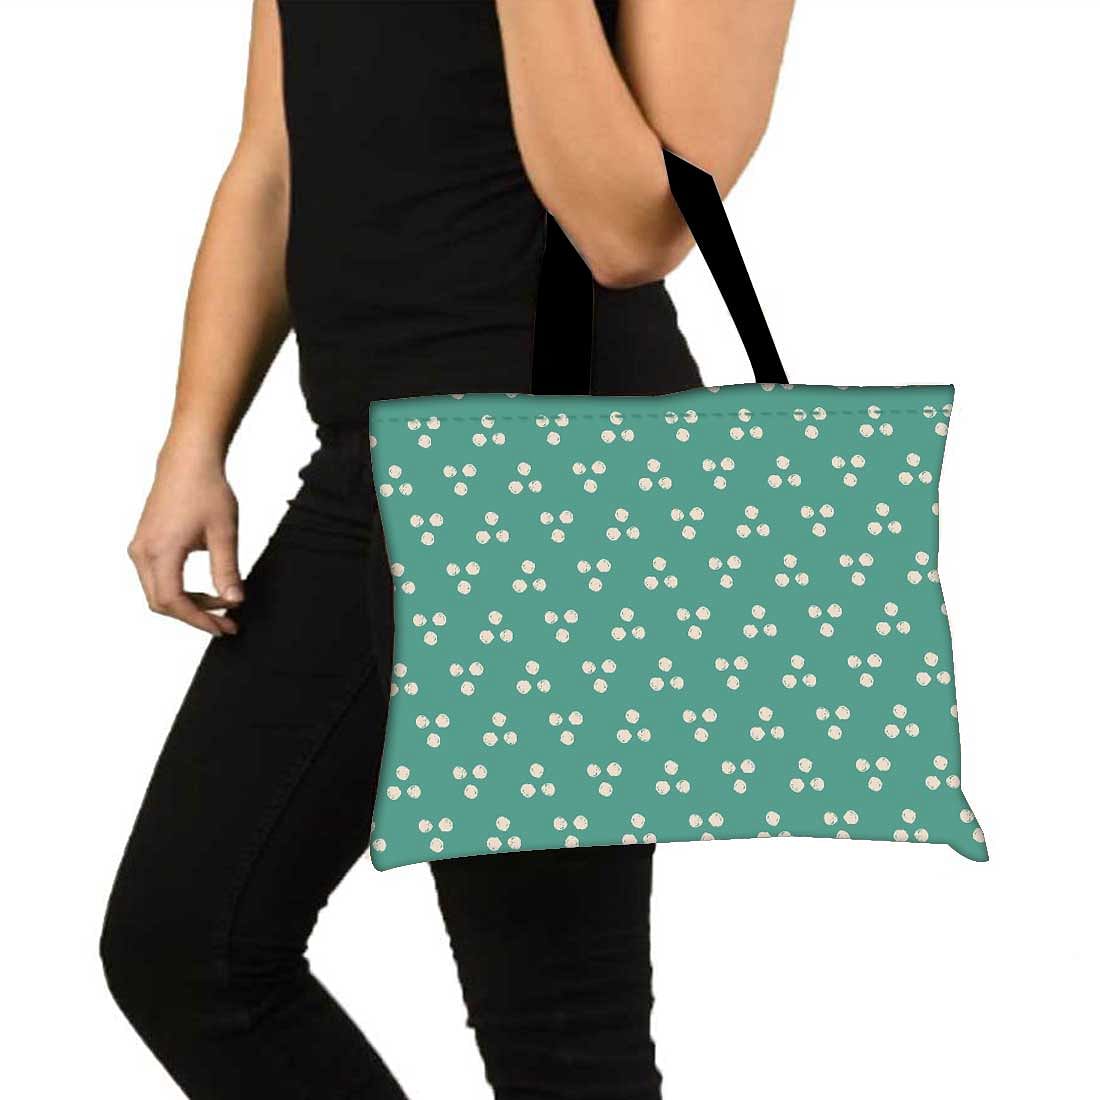 Designer Tote Bag With Zip Beach Gym Travel Bags - Dots - Blue